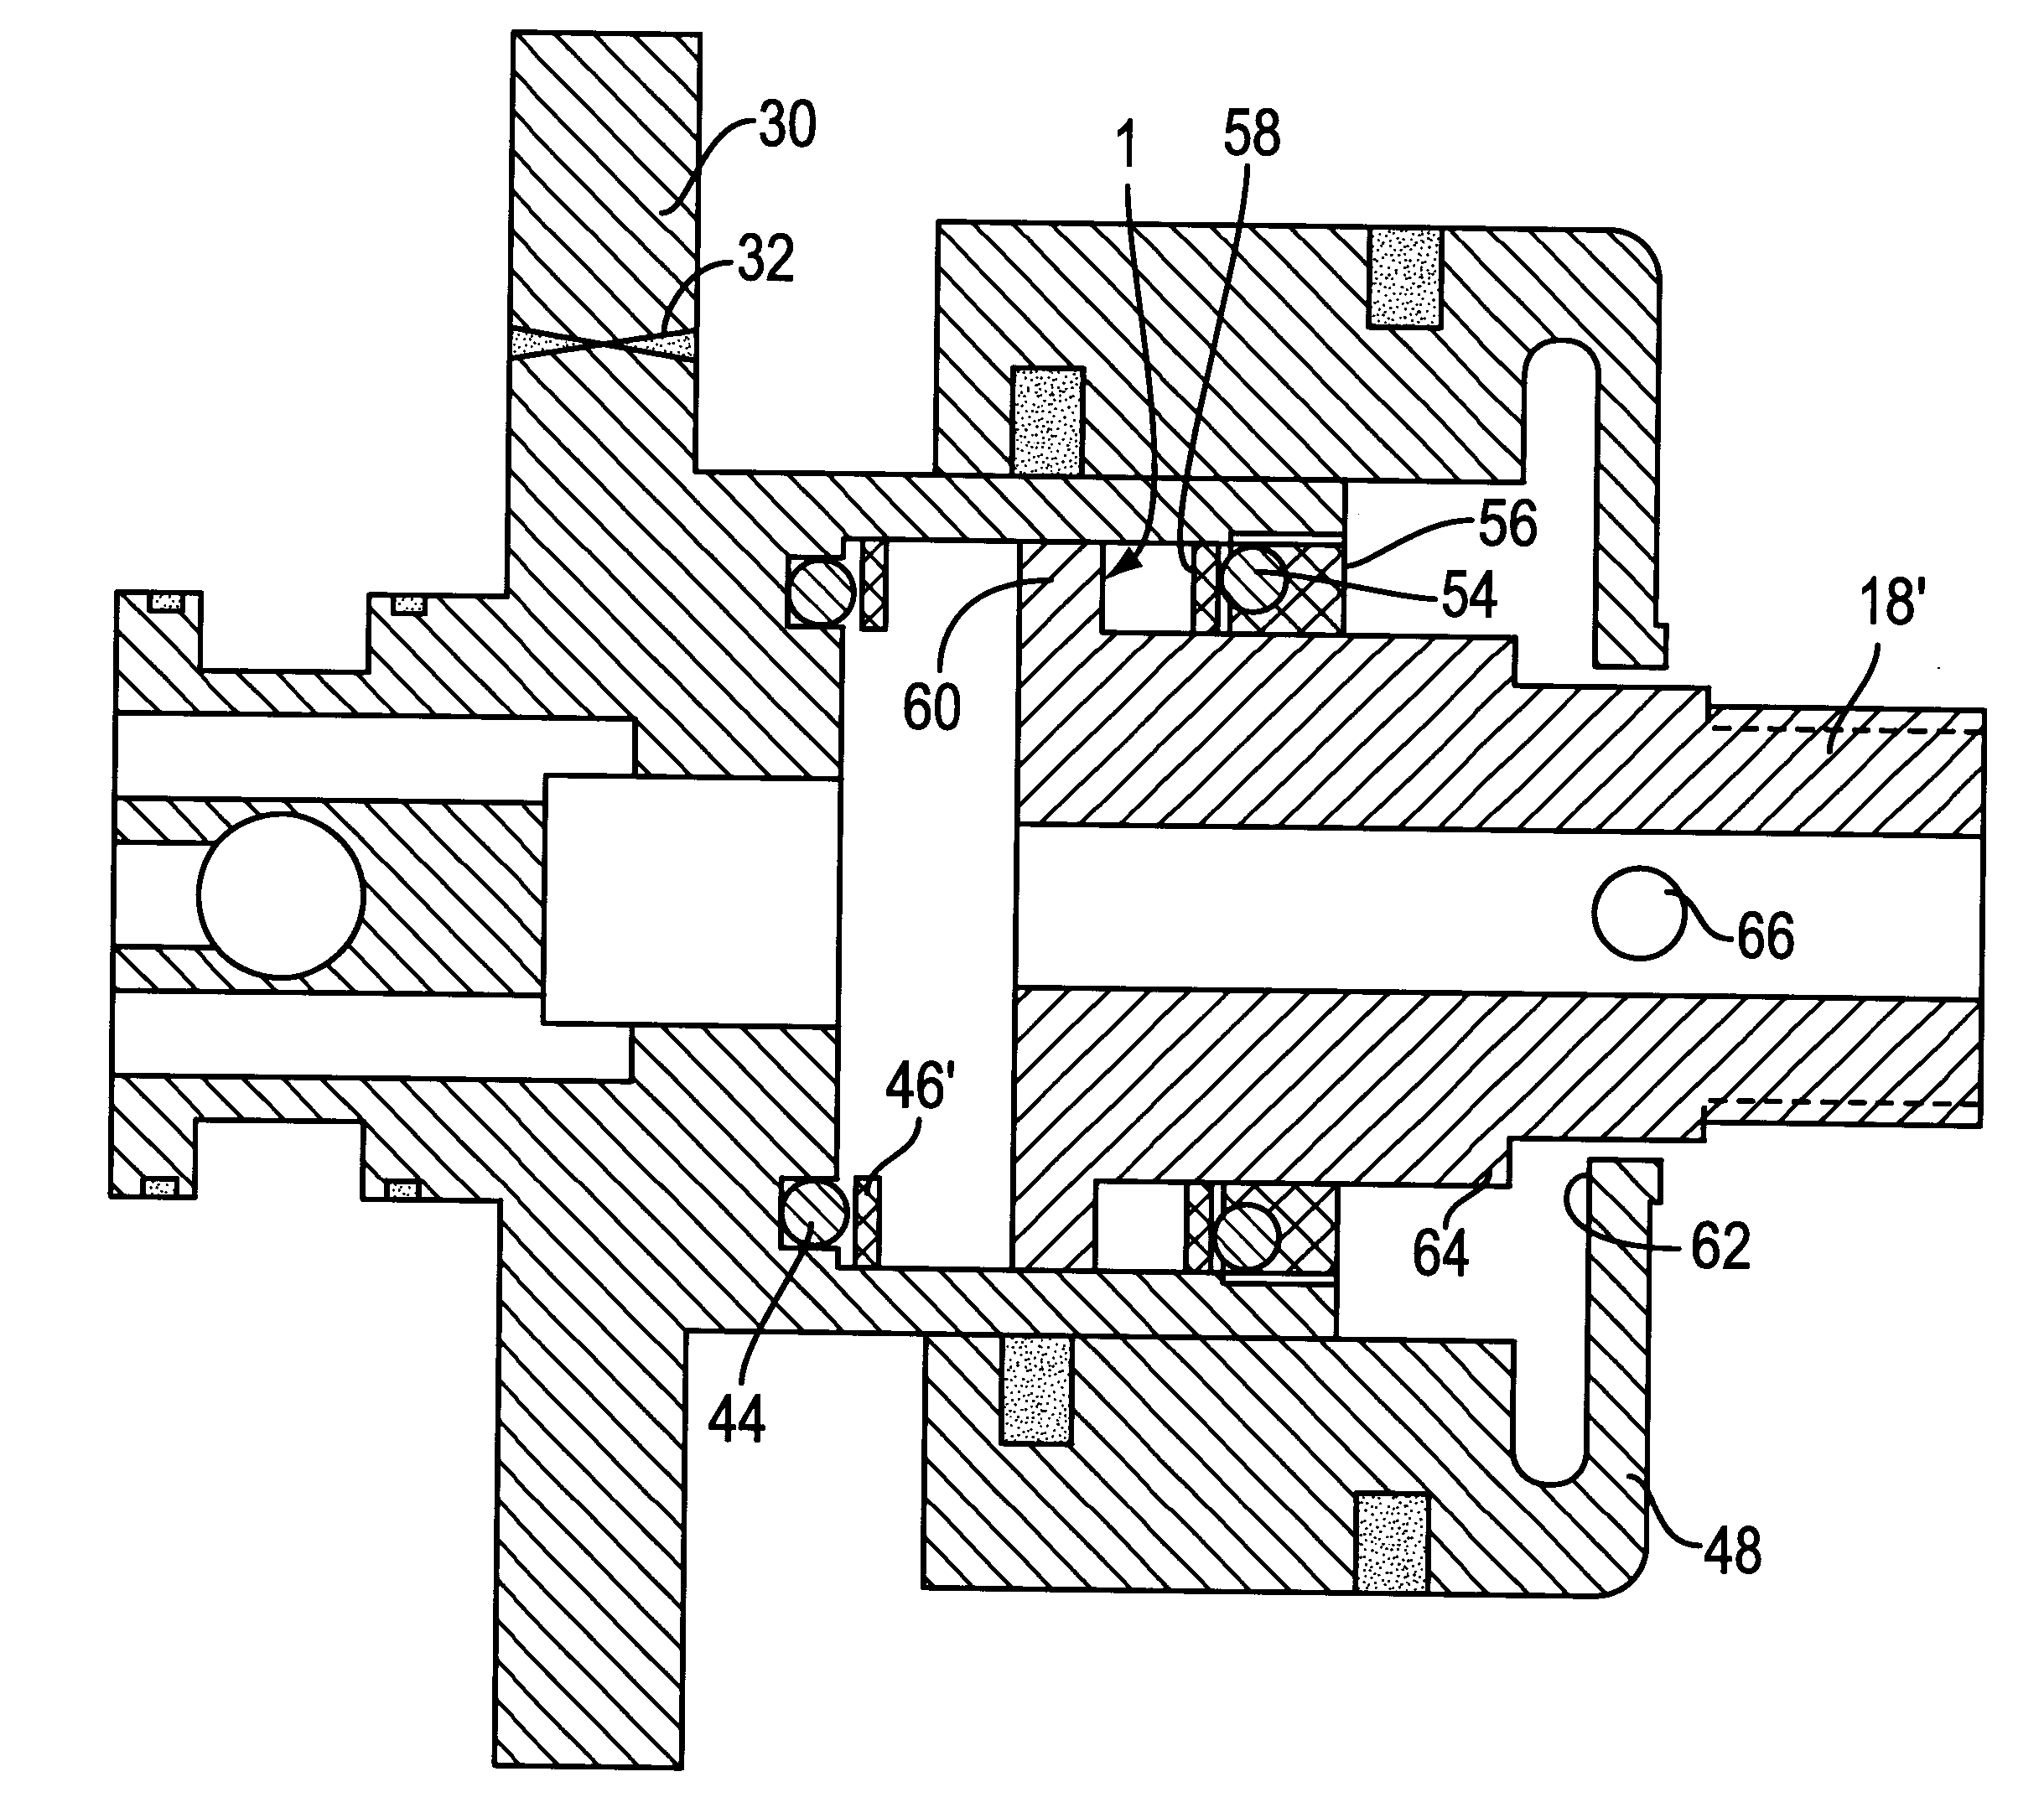 Reduced vibration cooling device having pneumatically-driven GM type displacer